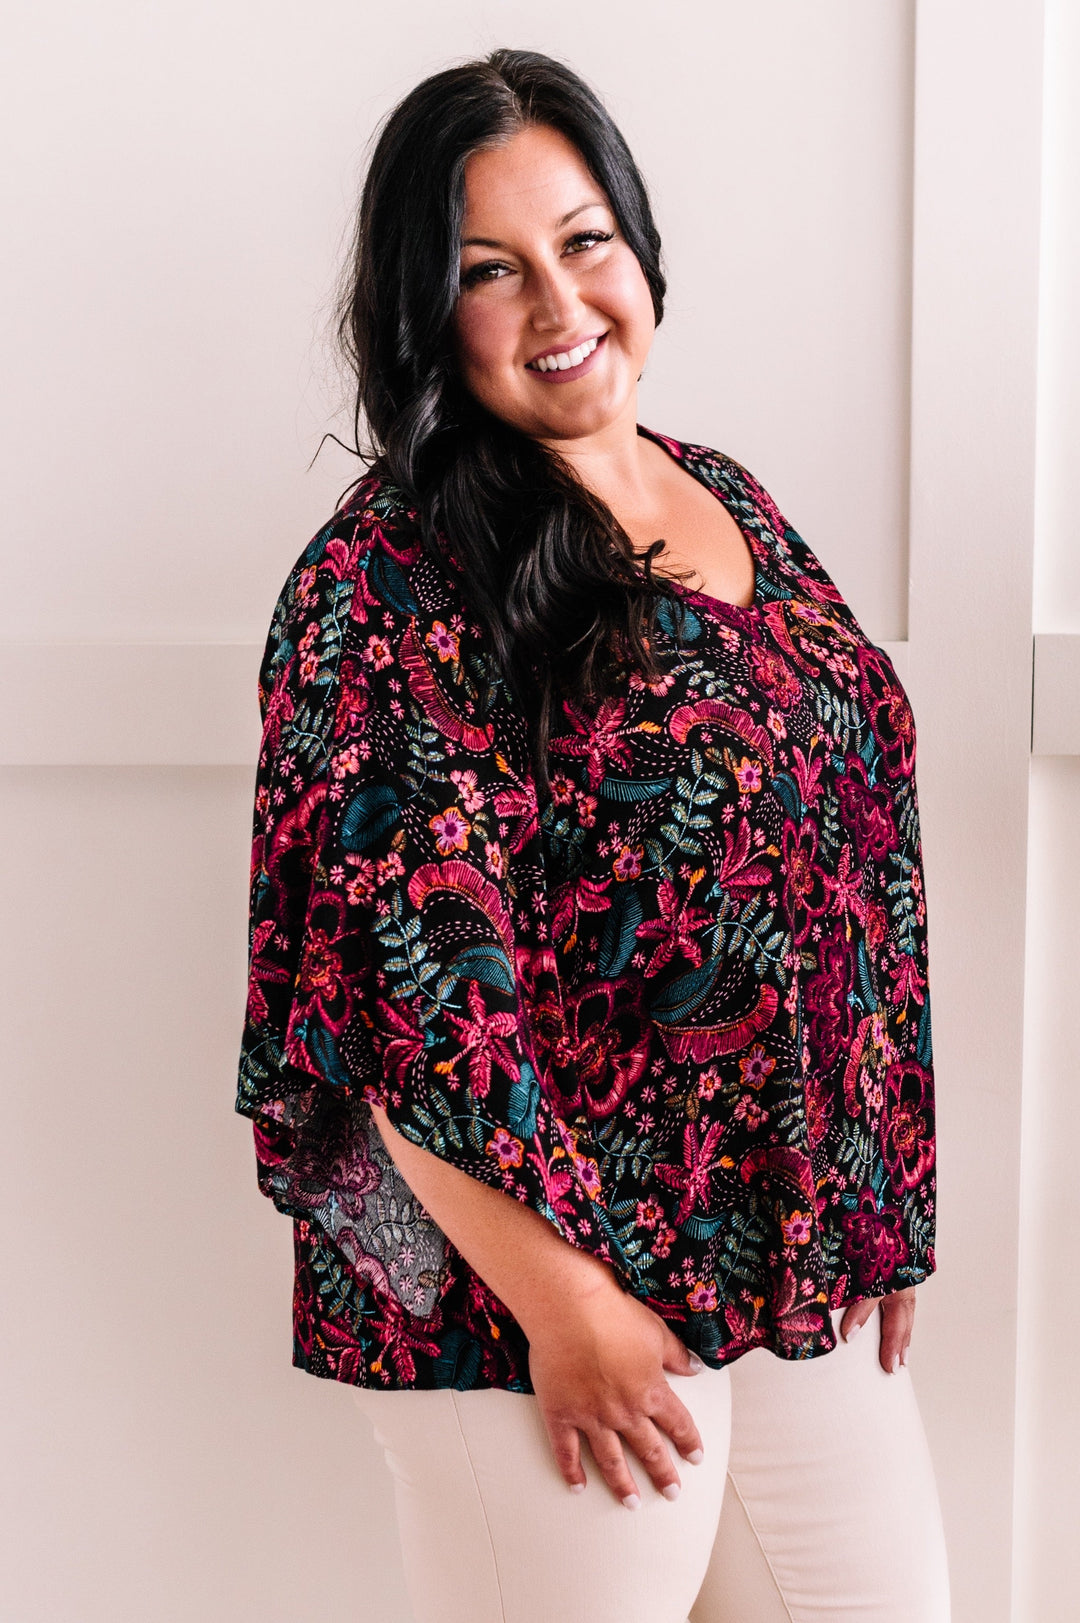 Angled Sleeve Blouse In Black Multicolored Floral Sketch